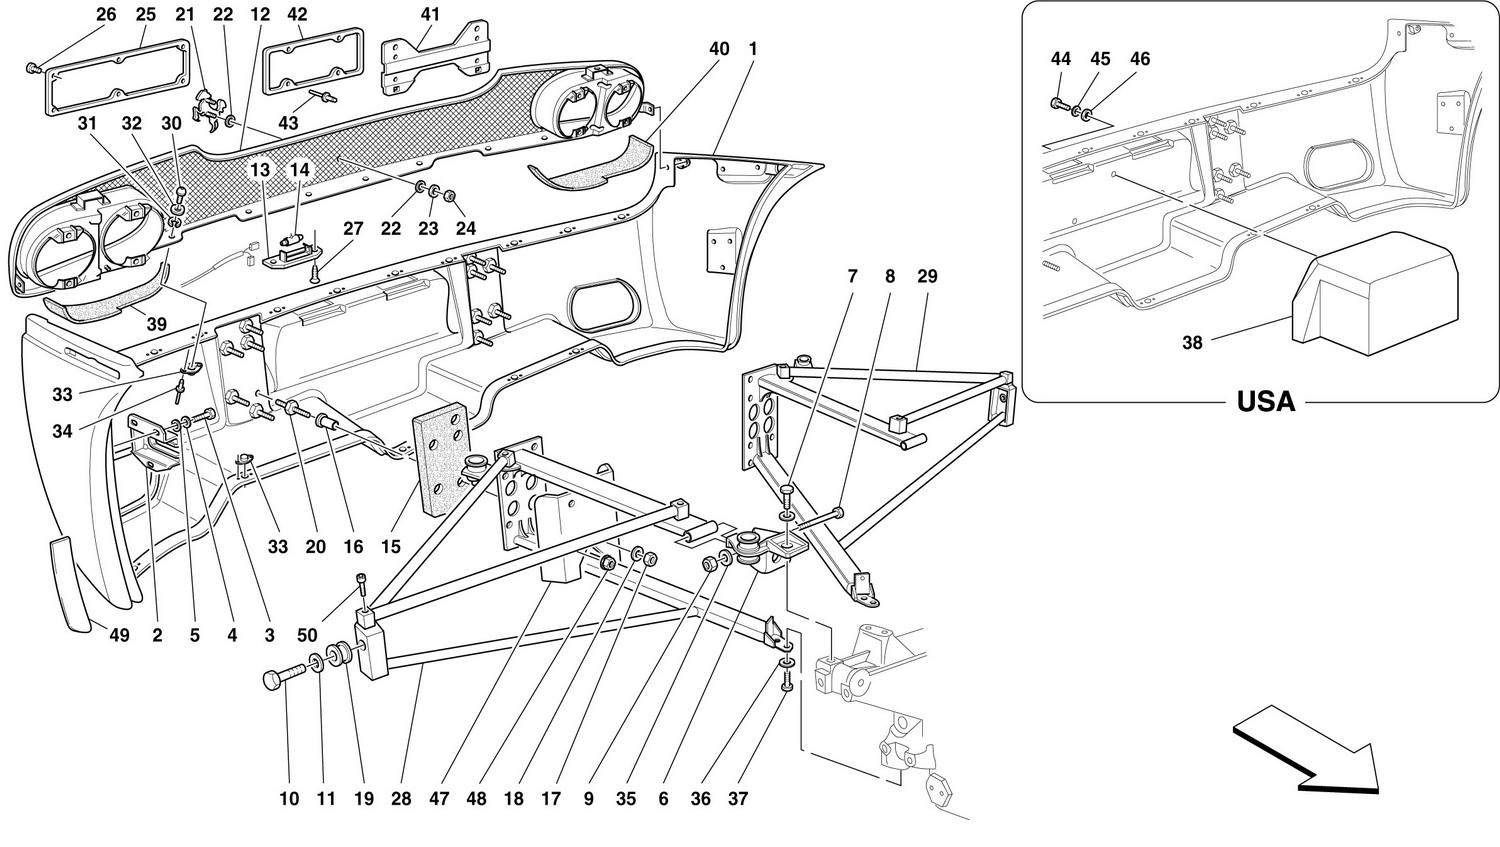 Schematic: Rear Bumper And Supports